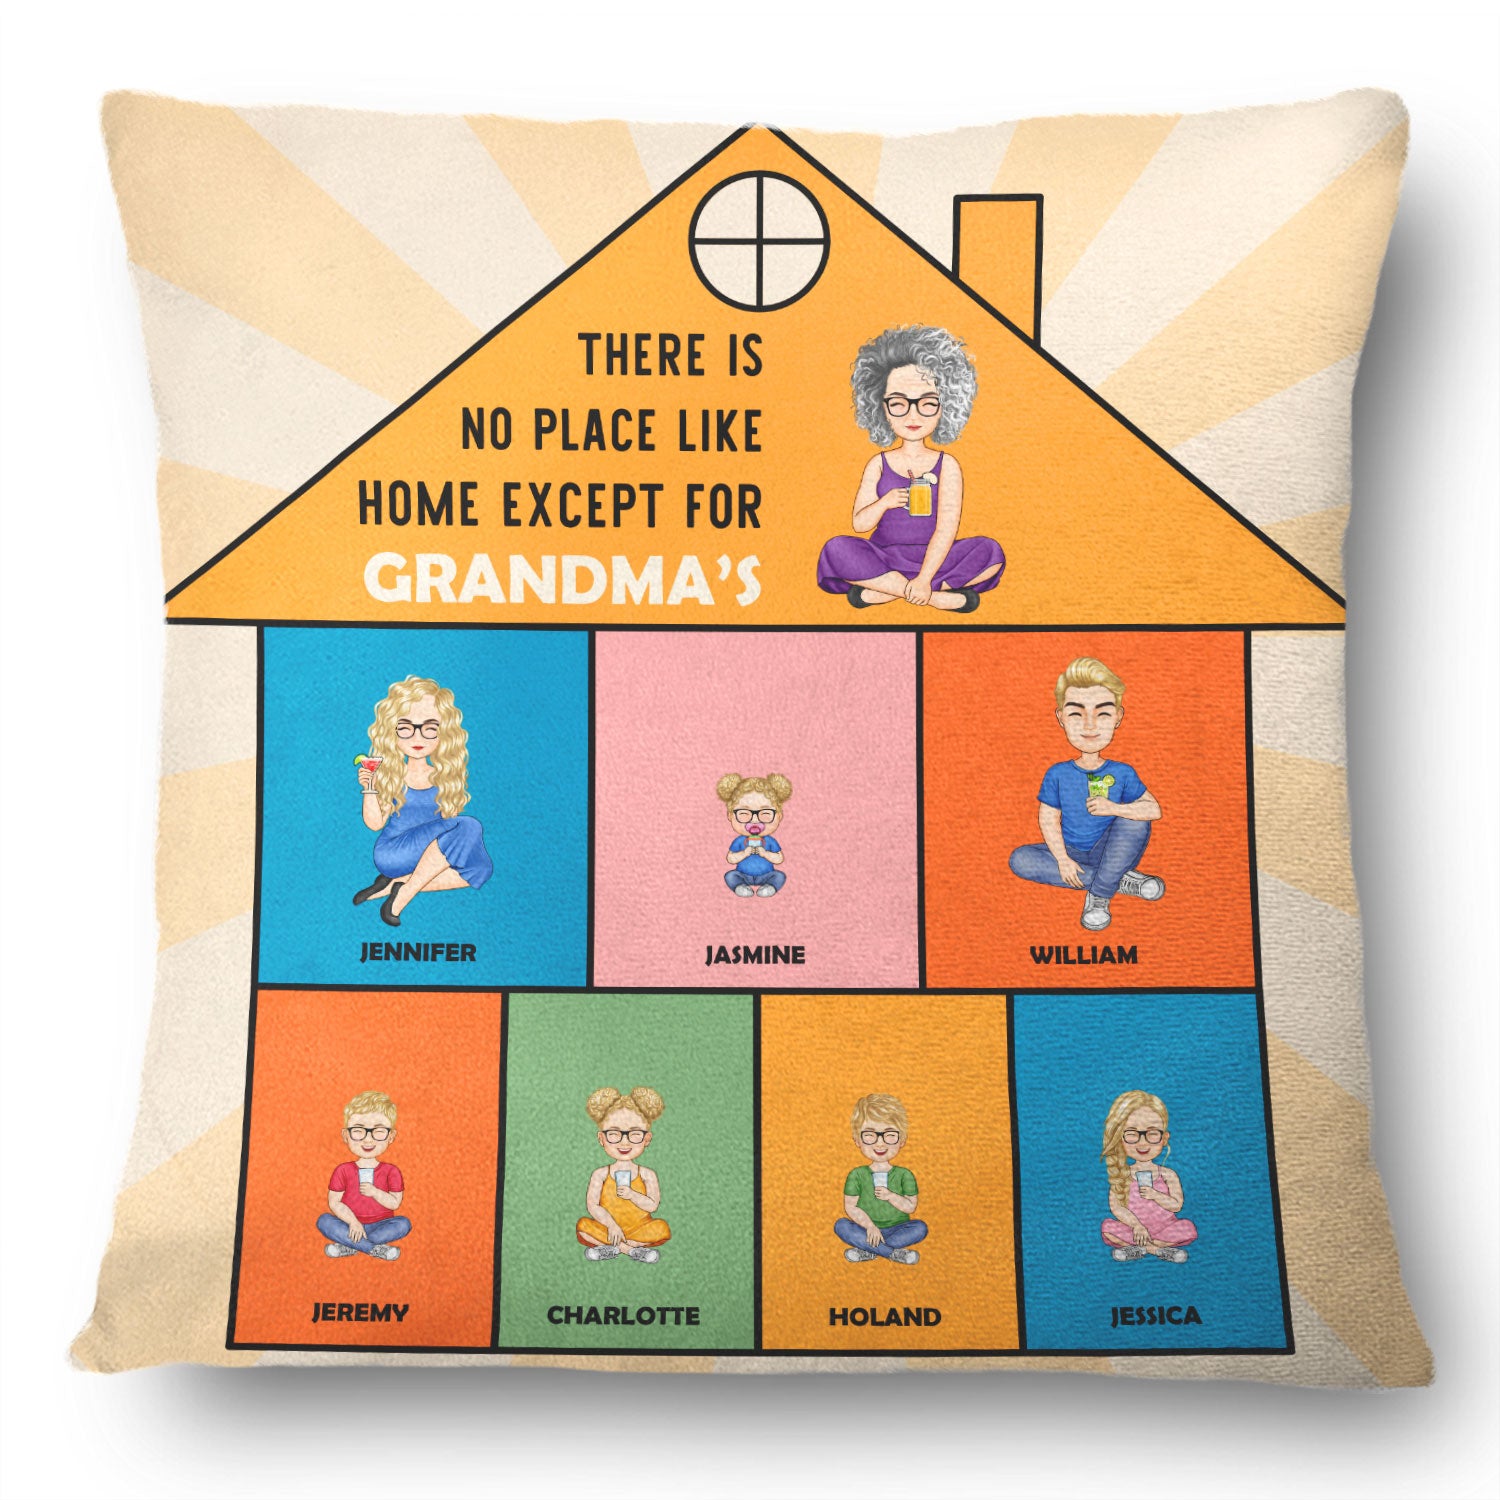 No Place Like Home - Gift For Parents And Grandparents - Personalized Pillow